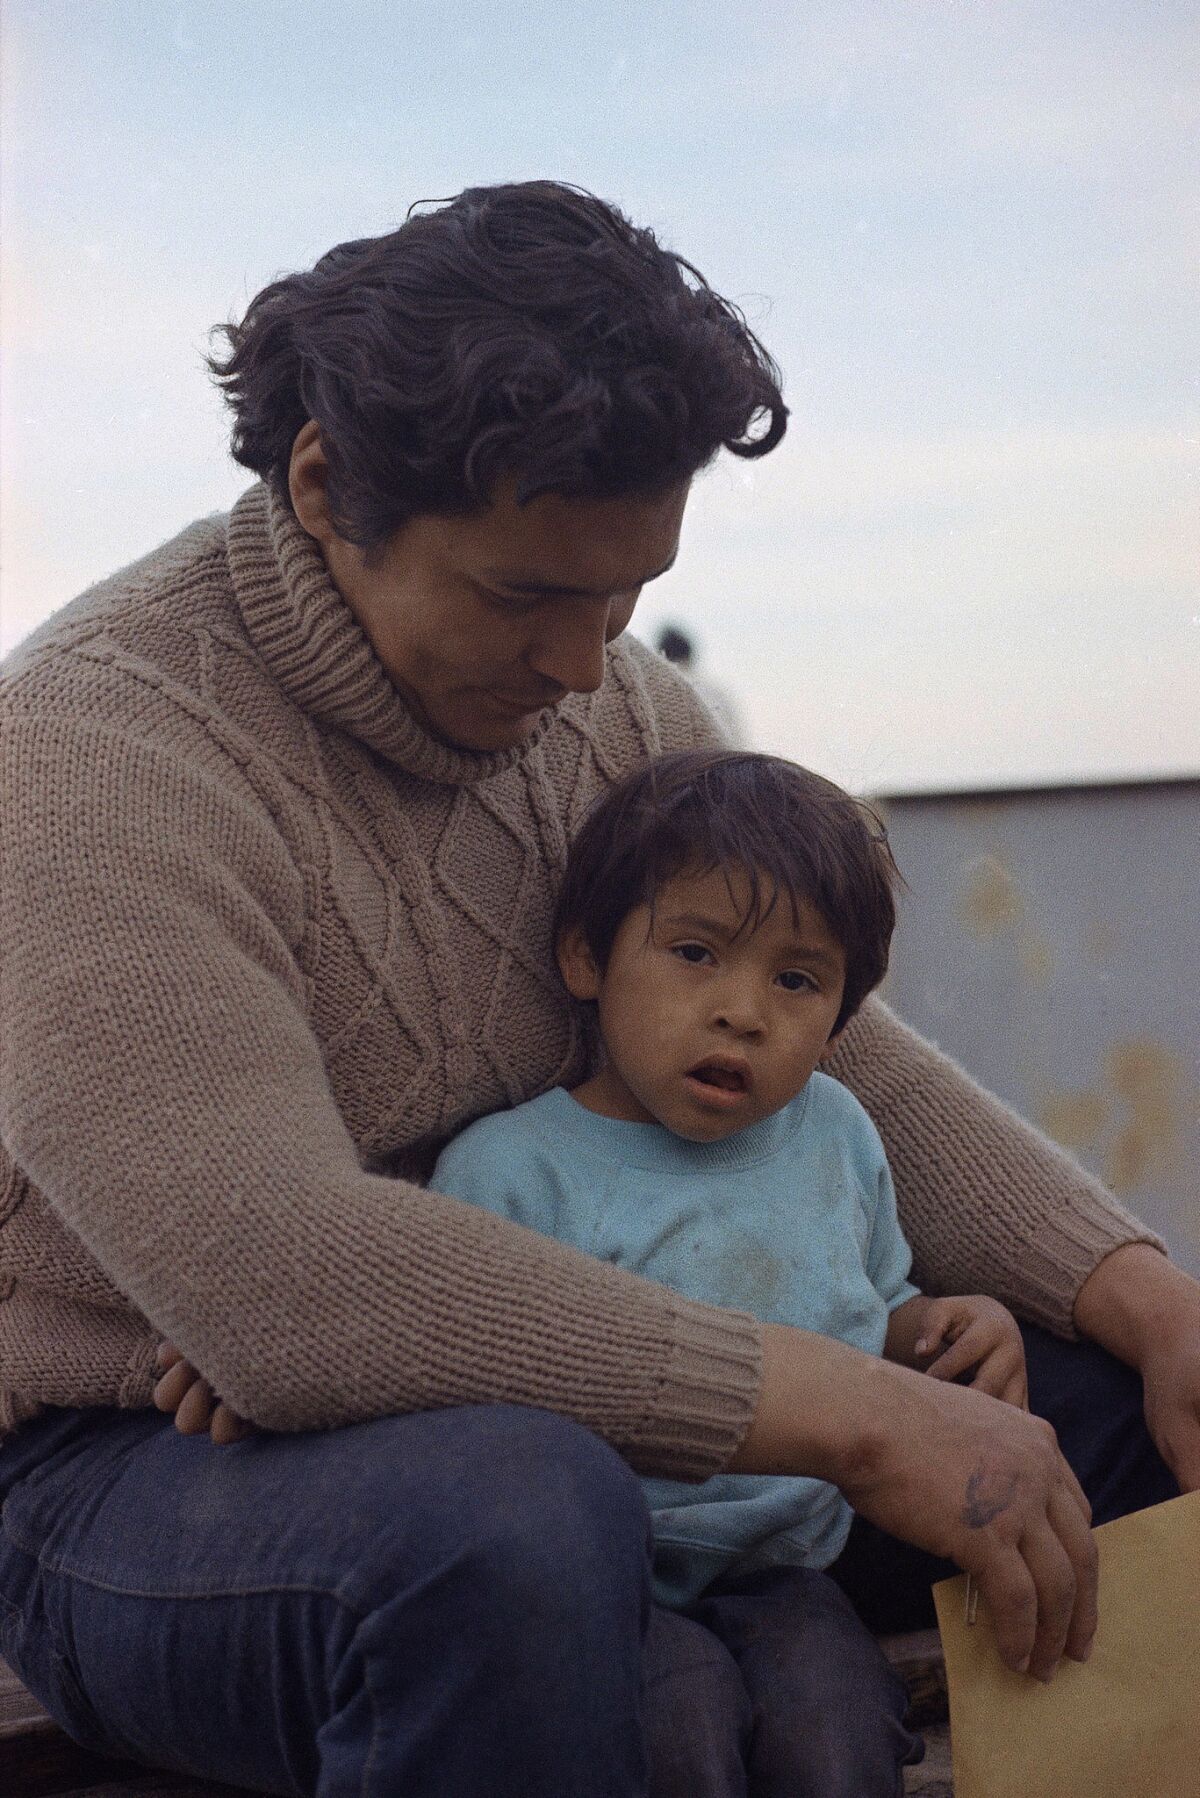 Richard Oakes, one of the Indian leaders, with a small child on Alcatraz, Nov. 17, 1970.